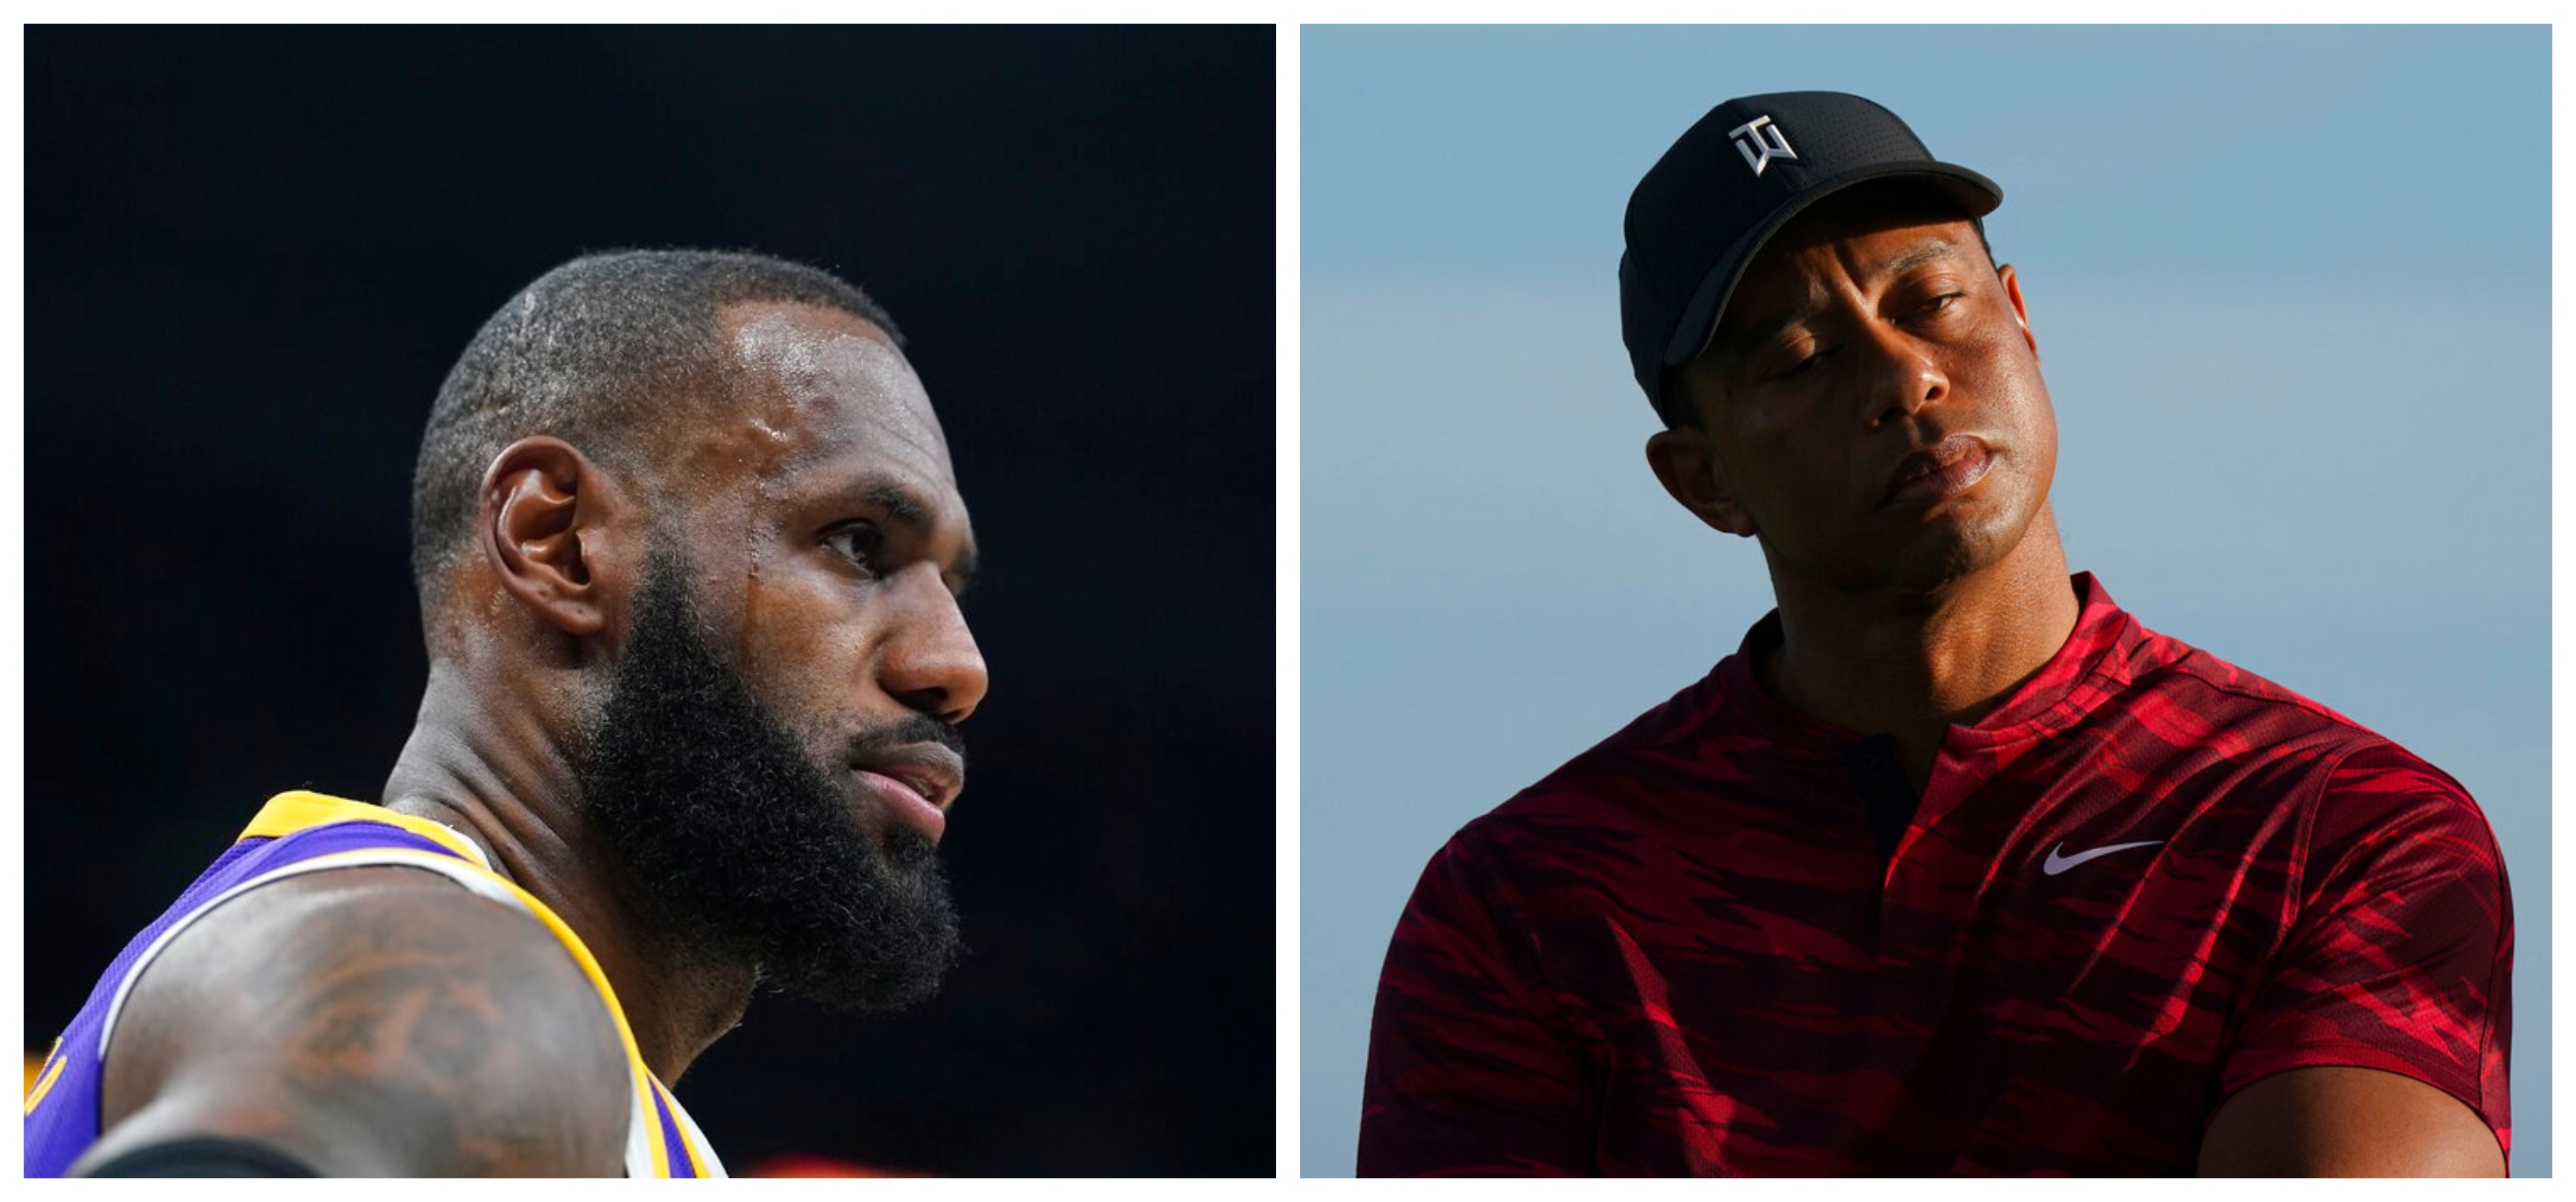 Today's famous birthdays list for December 30, 2021 includes celebrities LeBron James, Tiger Woods - cleveland.com